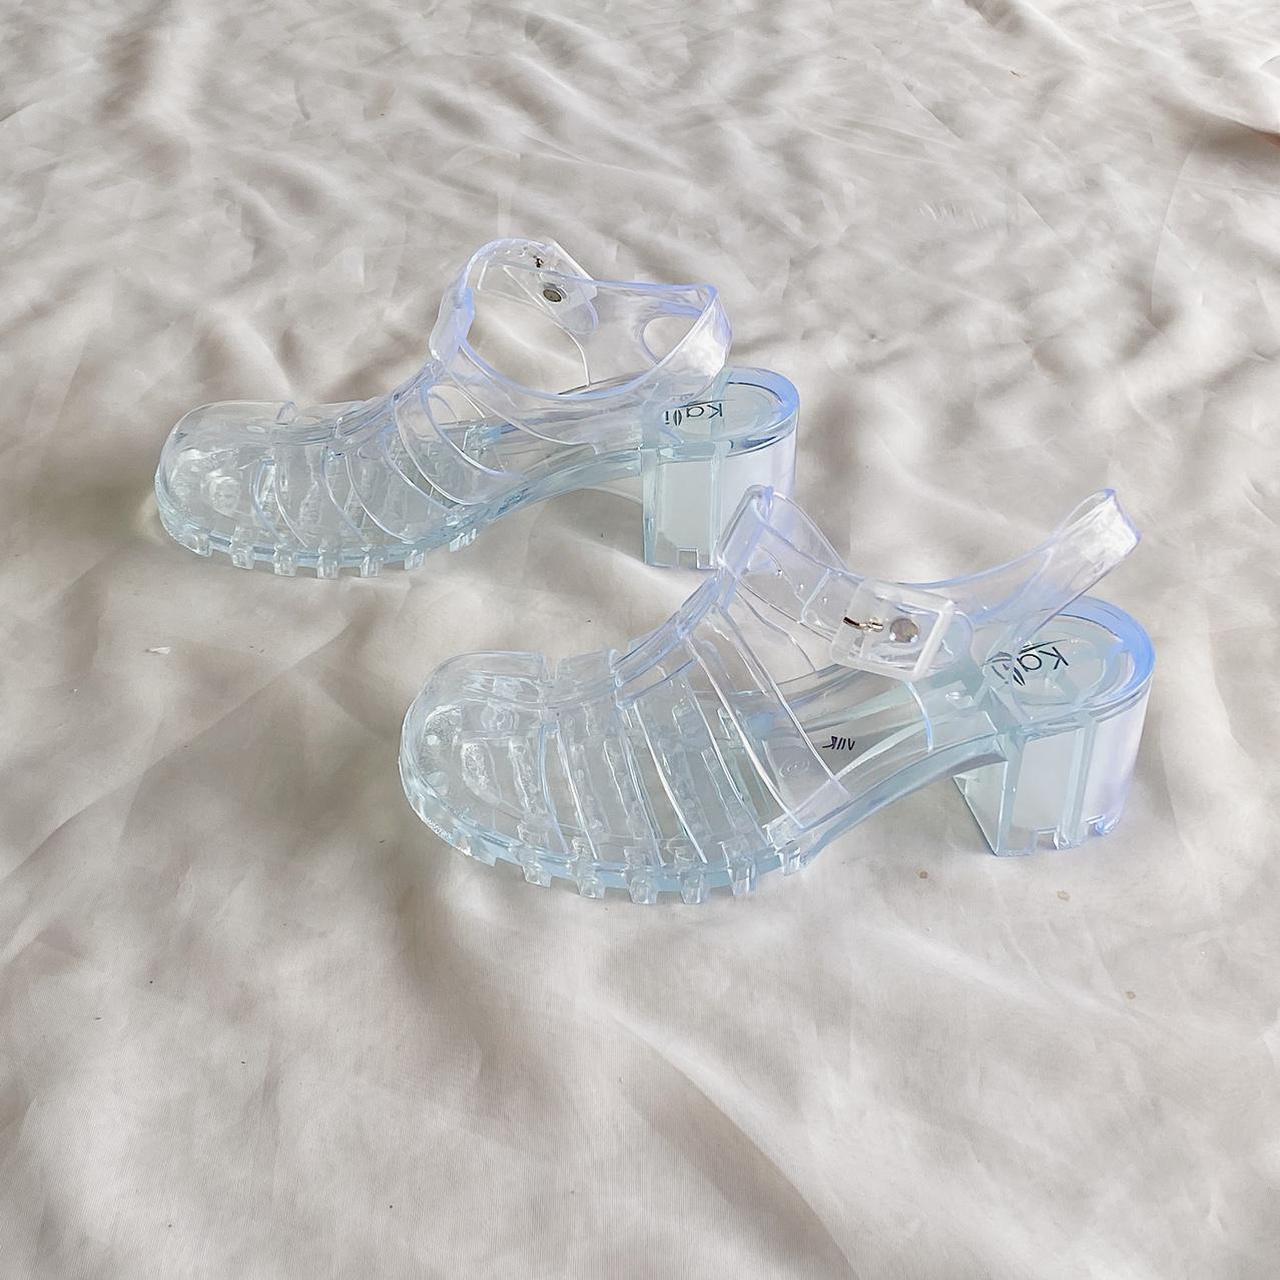 Product Image 2 - Clear Jelly Sandals 

#shoes #sandals